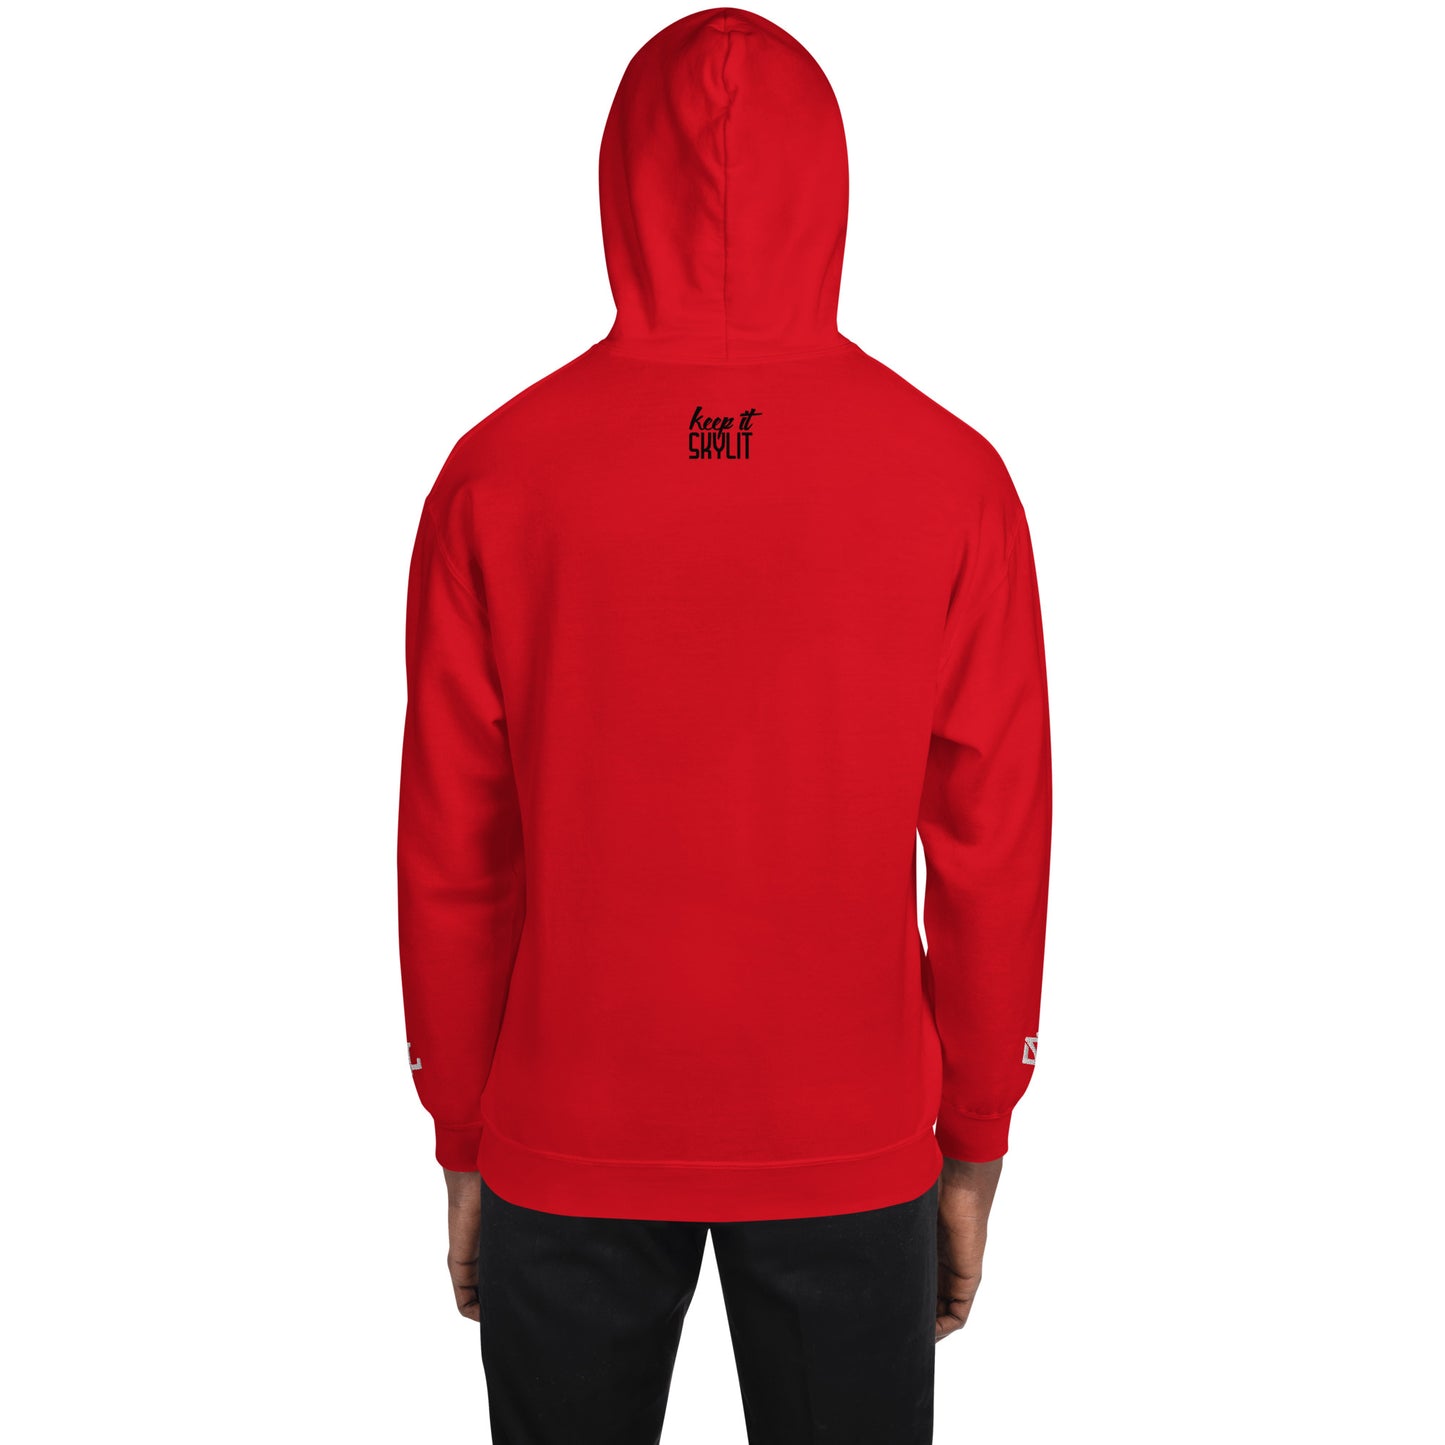 Run Skylit Embroidered Hoodie (Red)